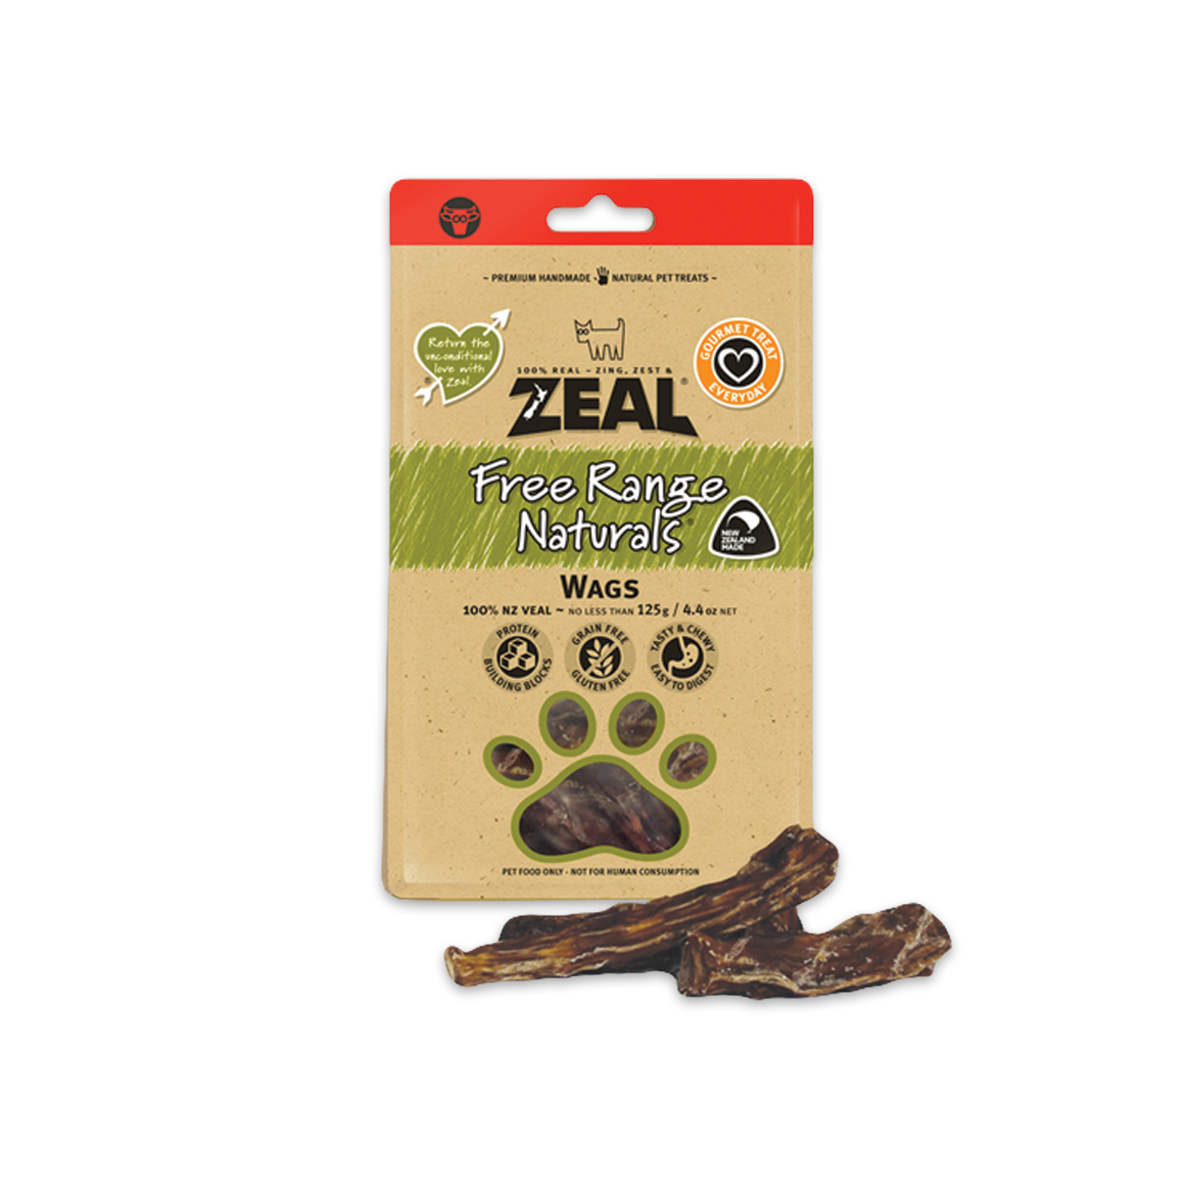 Zeal Freeze Dried Wags 125g